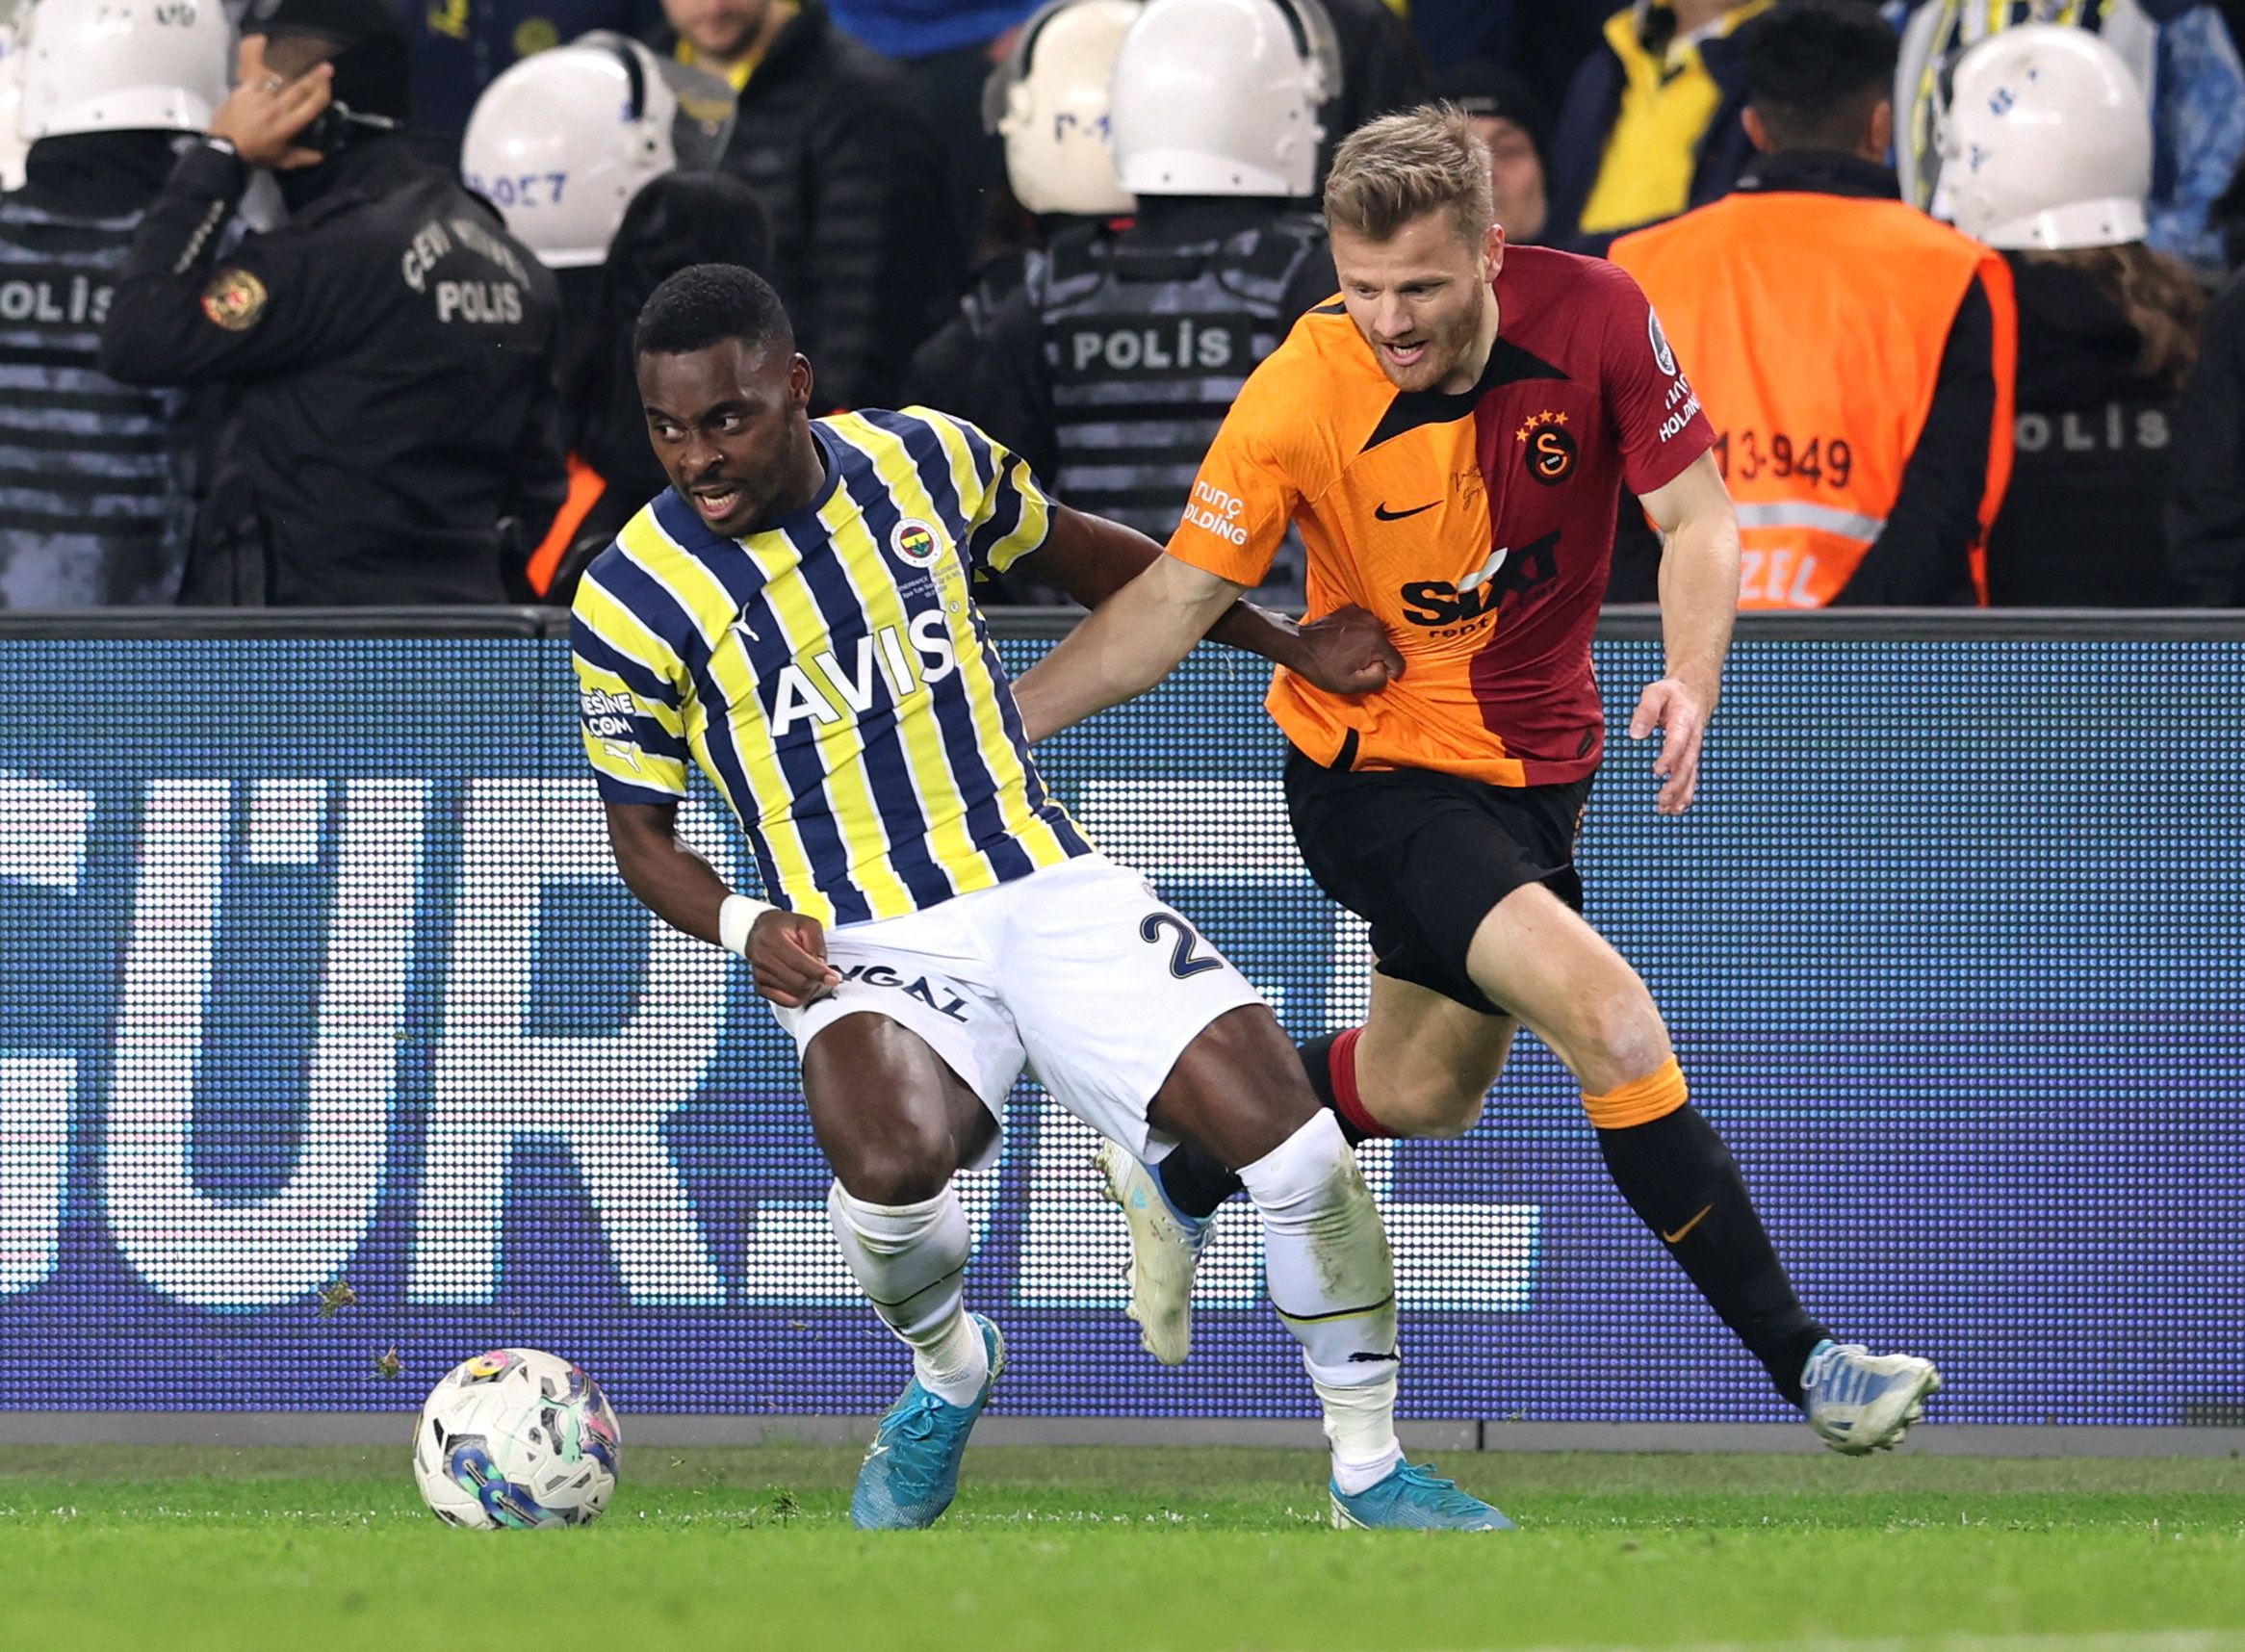 Bright-Osayi-Samuel-in-action-for-Fenerbahce